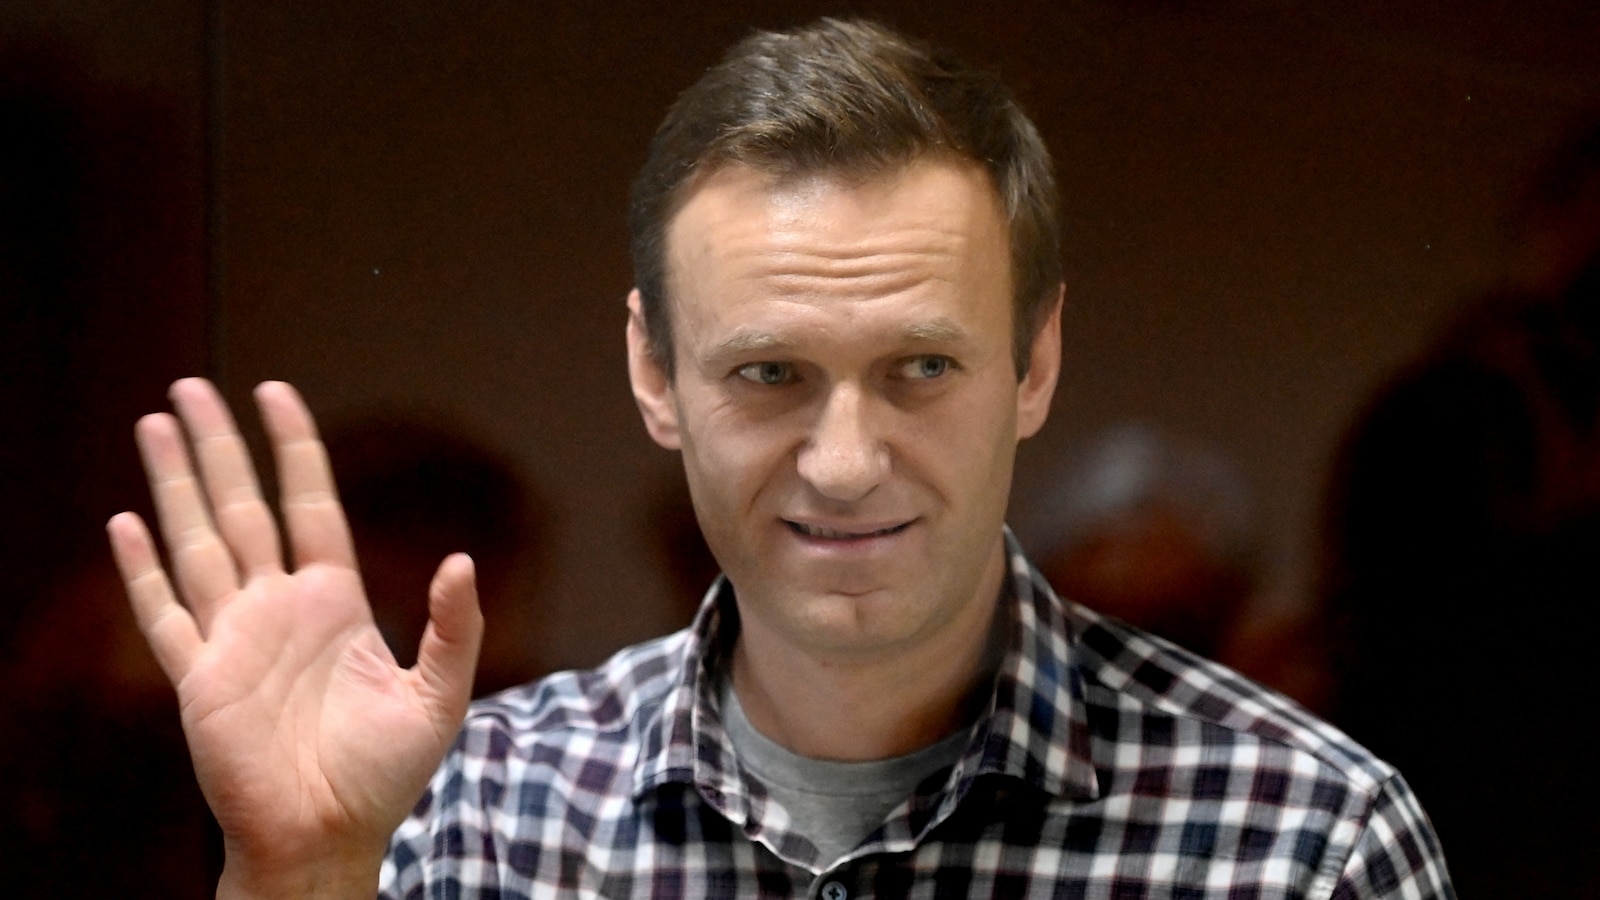 Death of Alexei Navalny, Prominent Critic of Vladimir Putin and Russian Government, Occurs in Prison